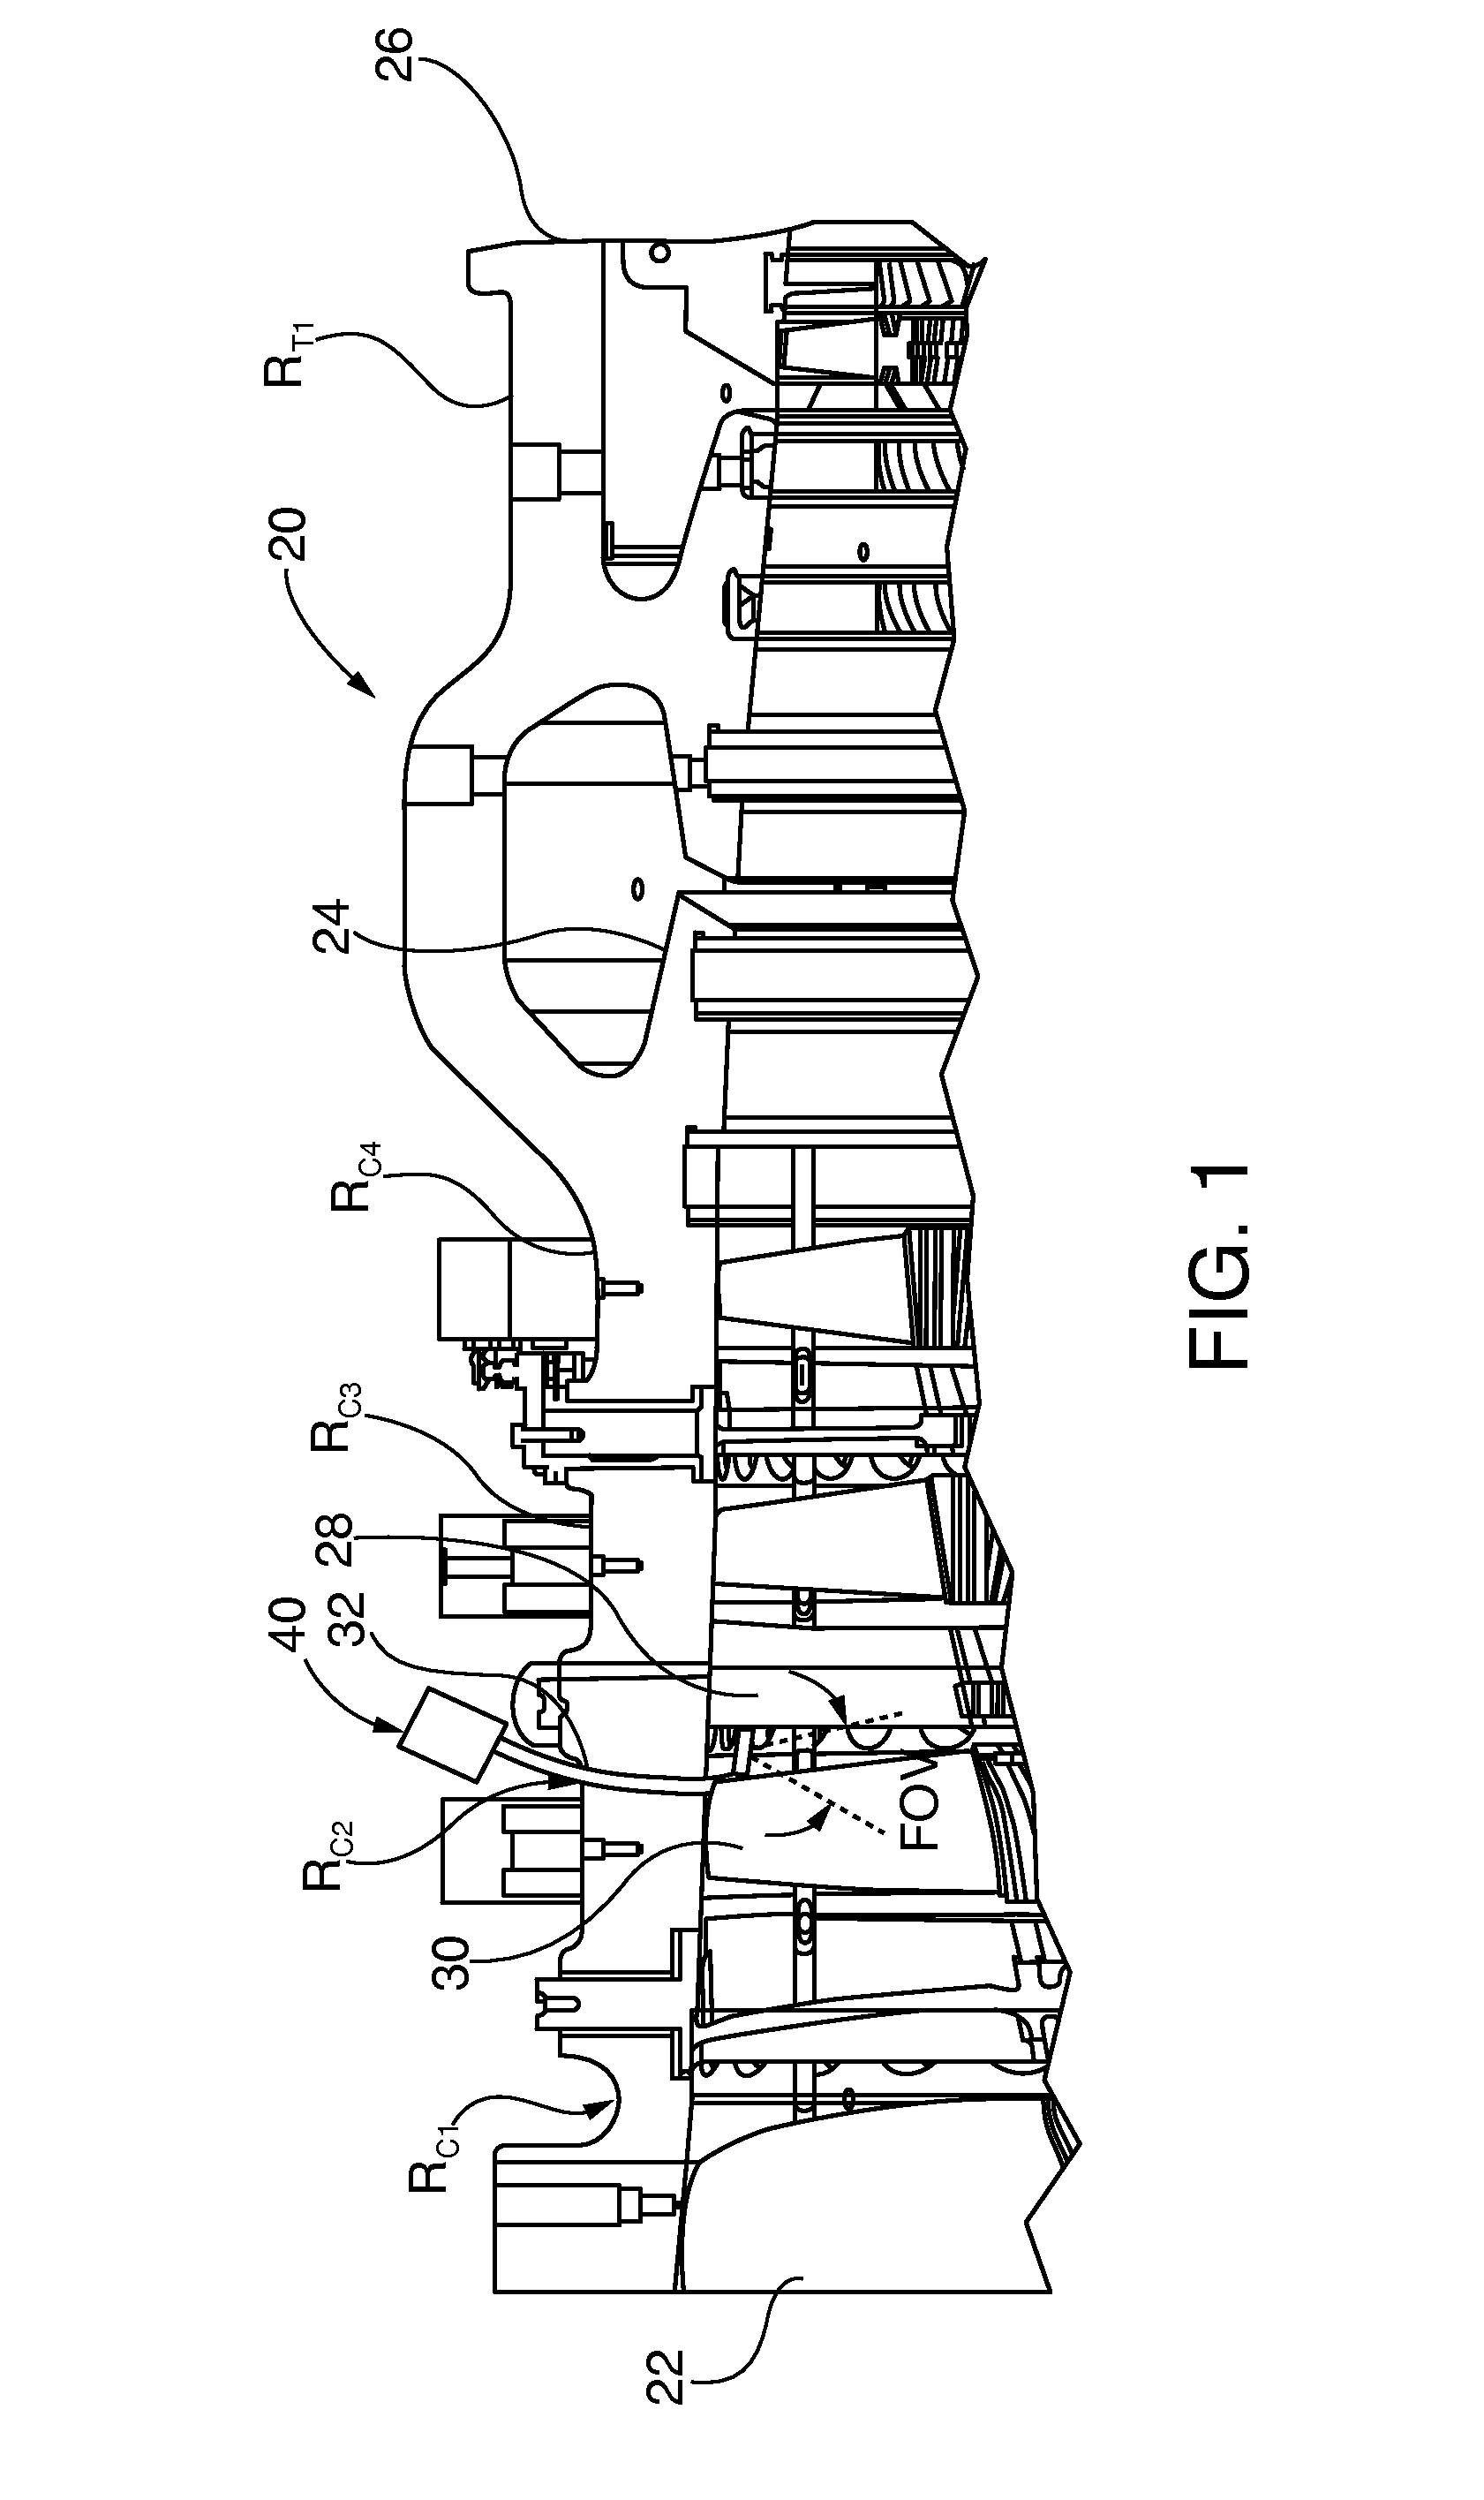 Flexible linkage camera system and method for visual inspection of off line industrial gas turbines and other power generation machinery